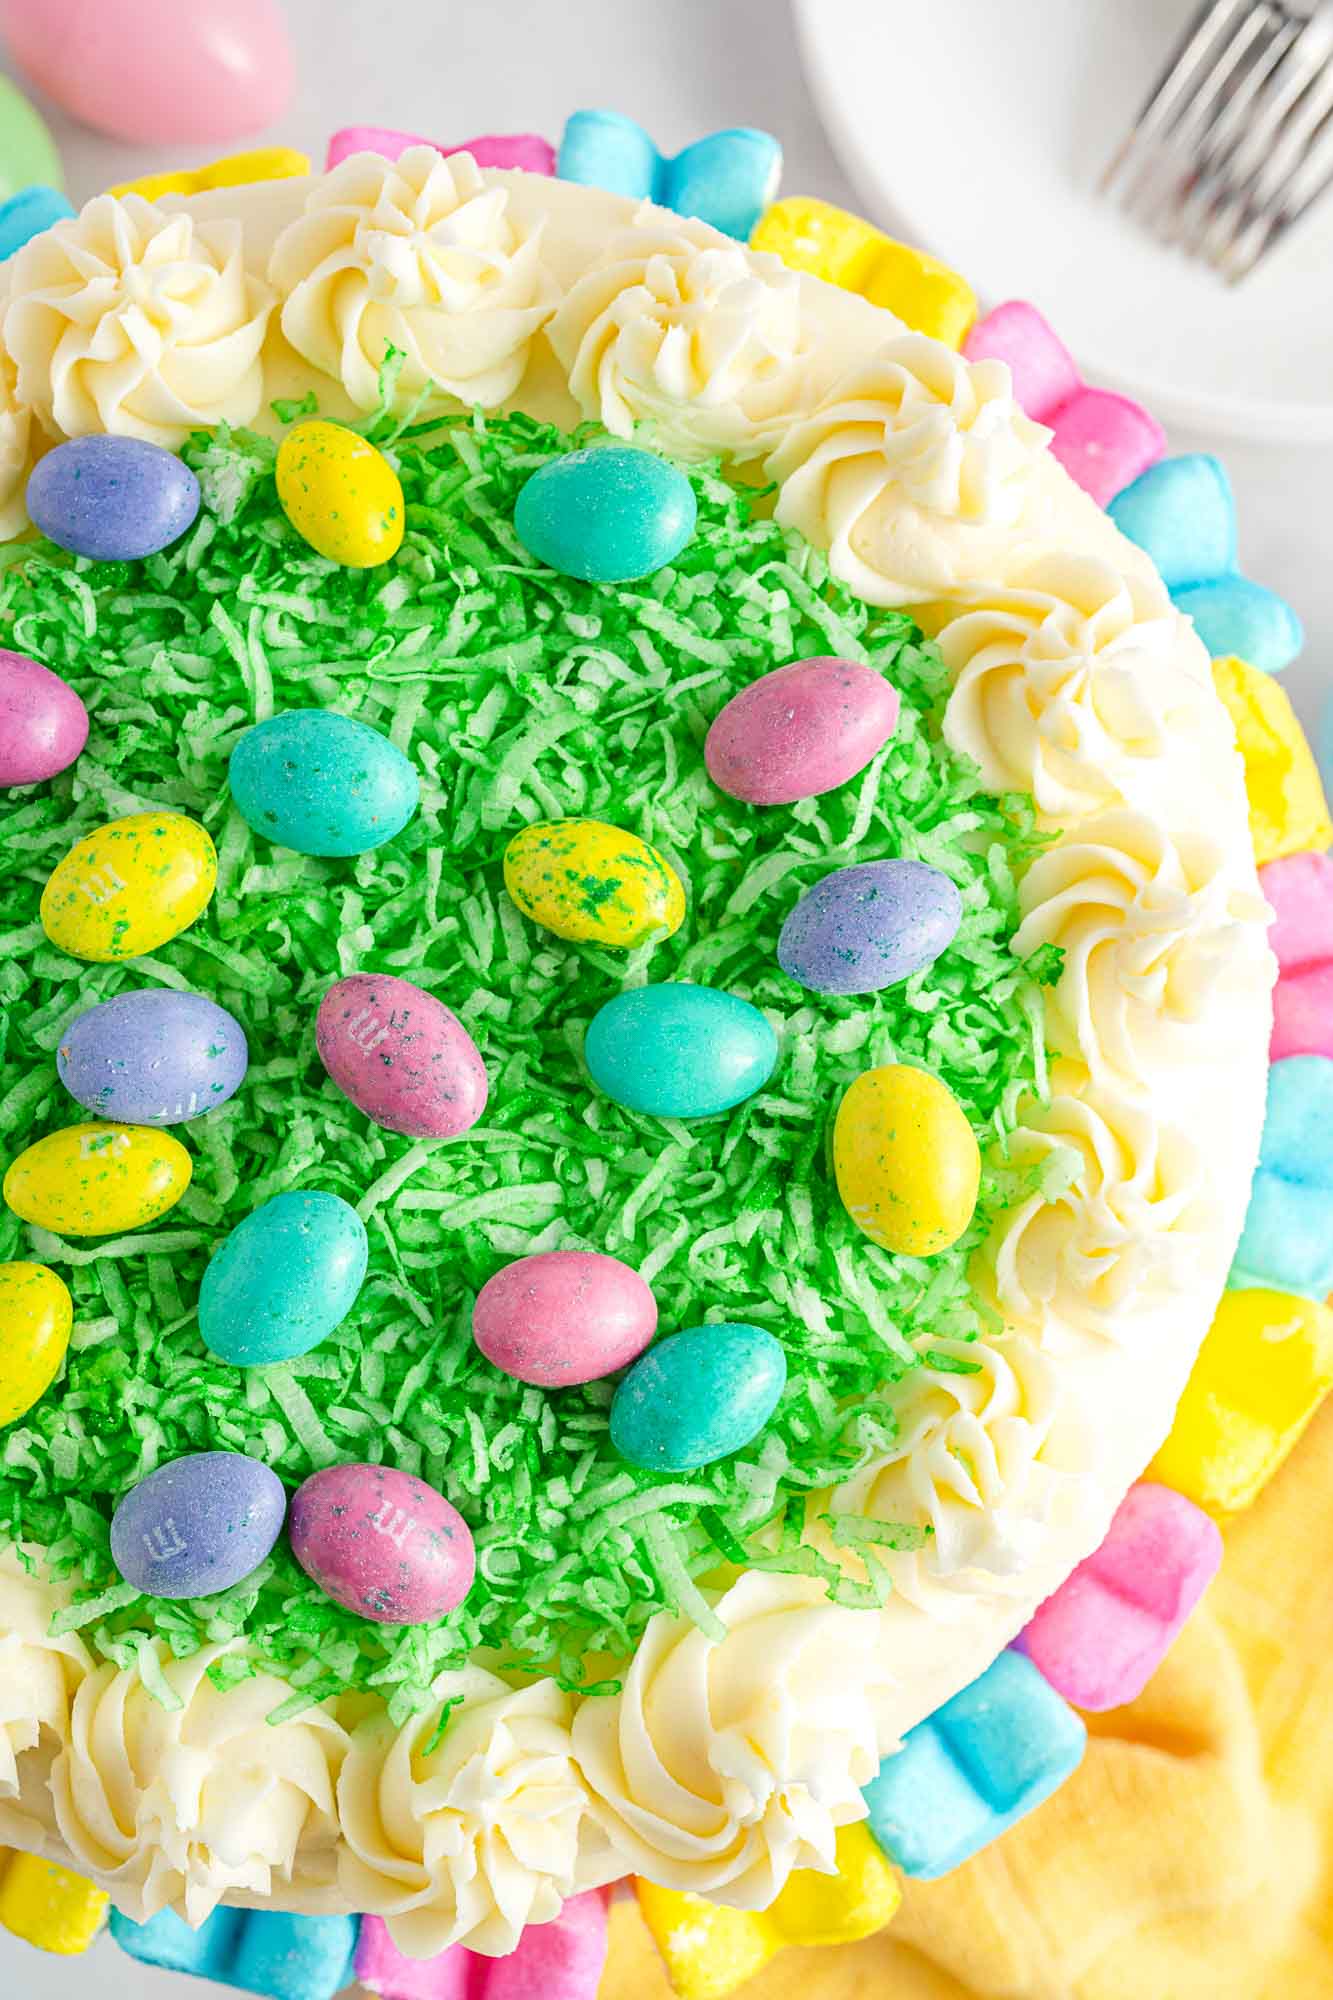 Overhead shot of an Easter cake with green coconut grass and M&M's Easter eggs.